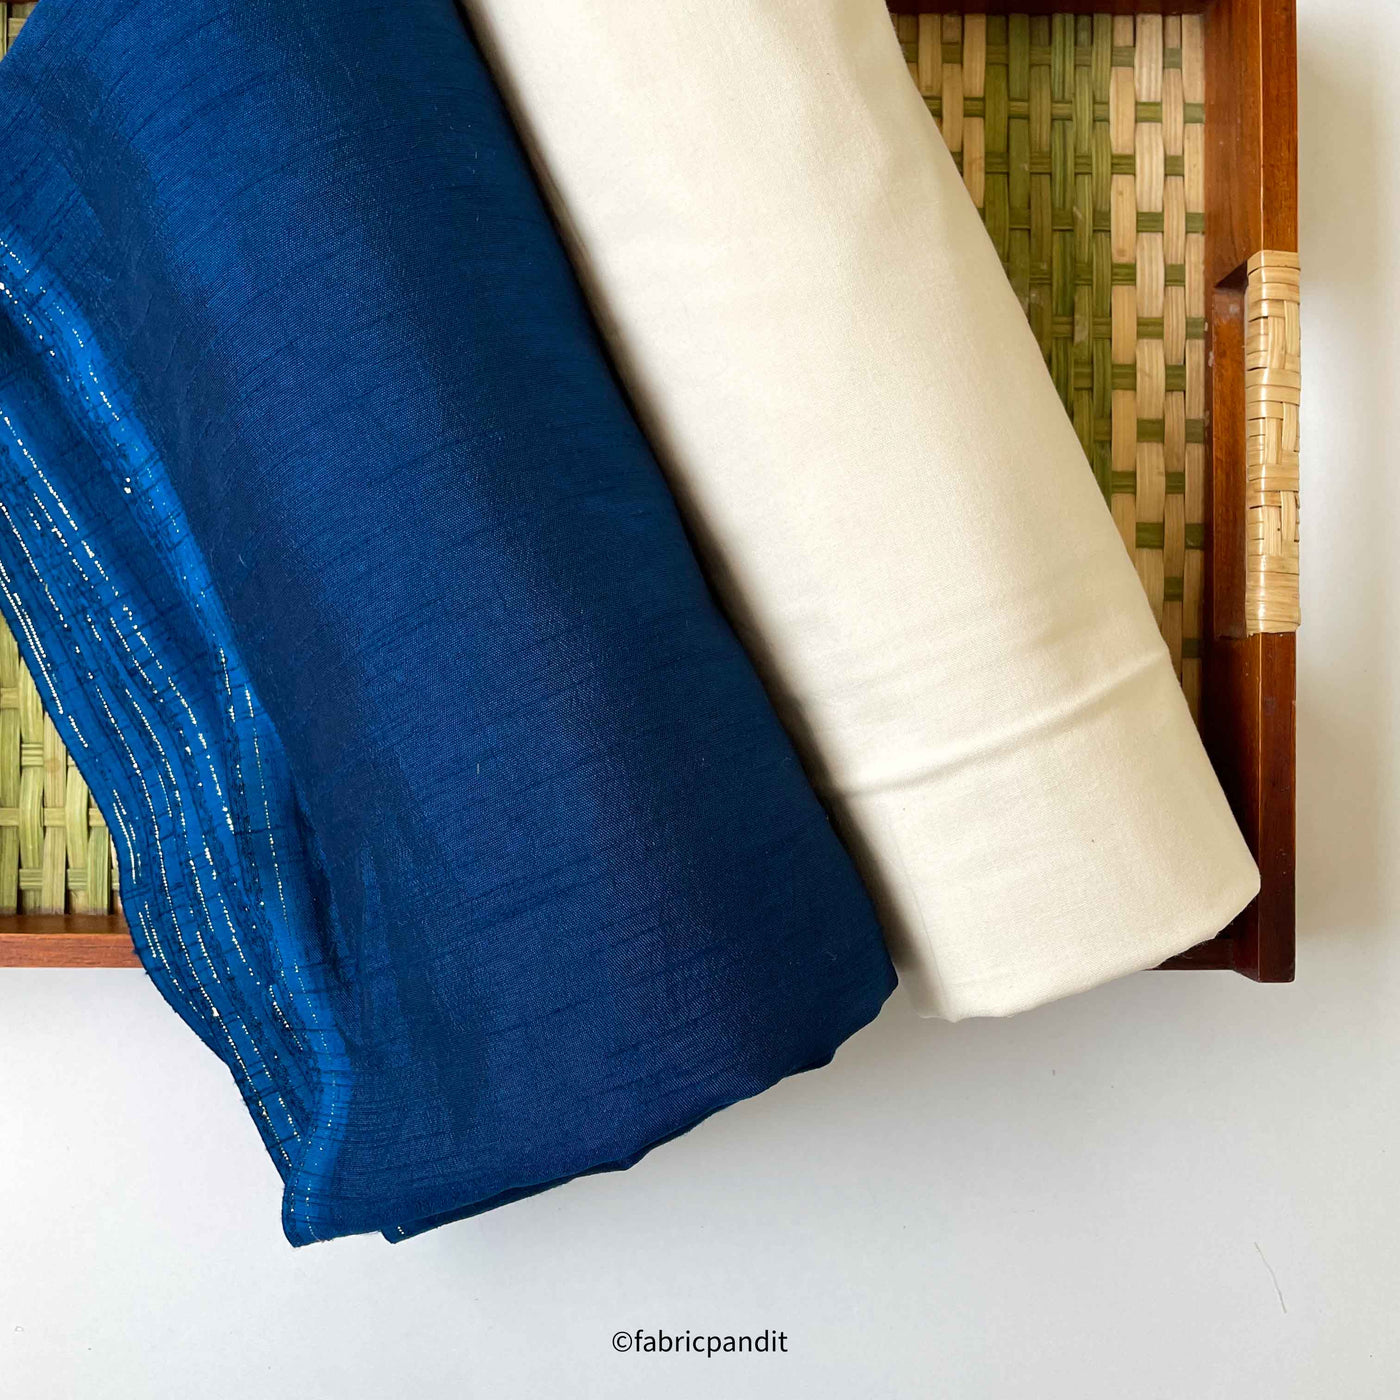 Buy Blue Plain Khadi Rayon Fabric for Best Price, Reviews, Free Shipping